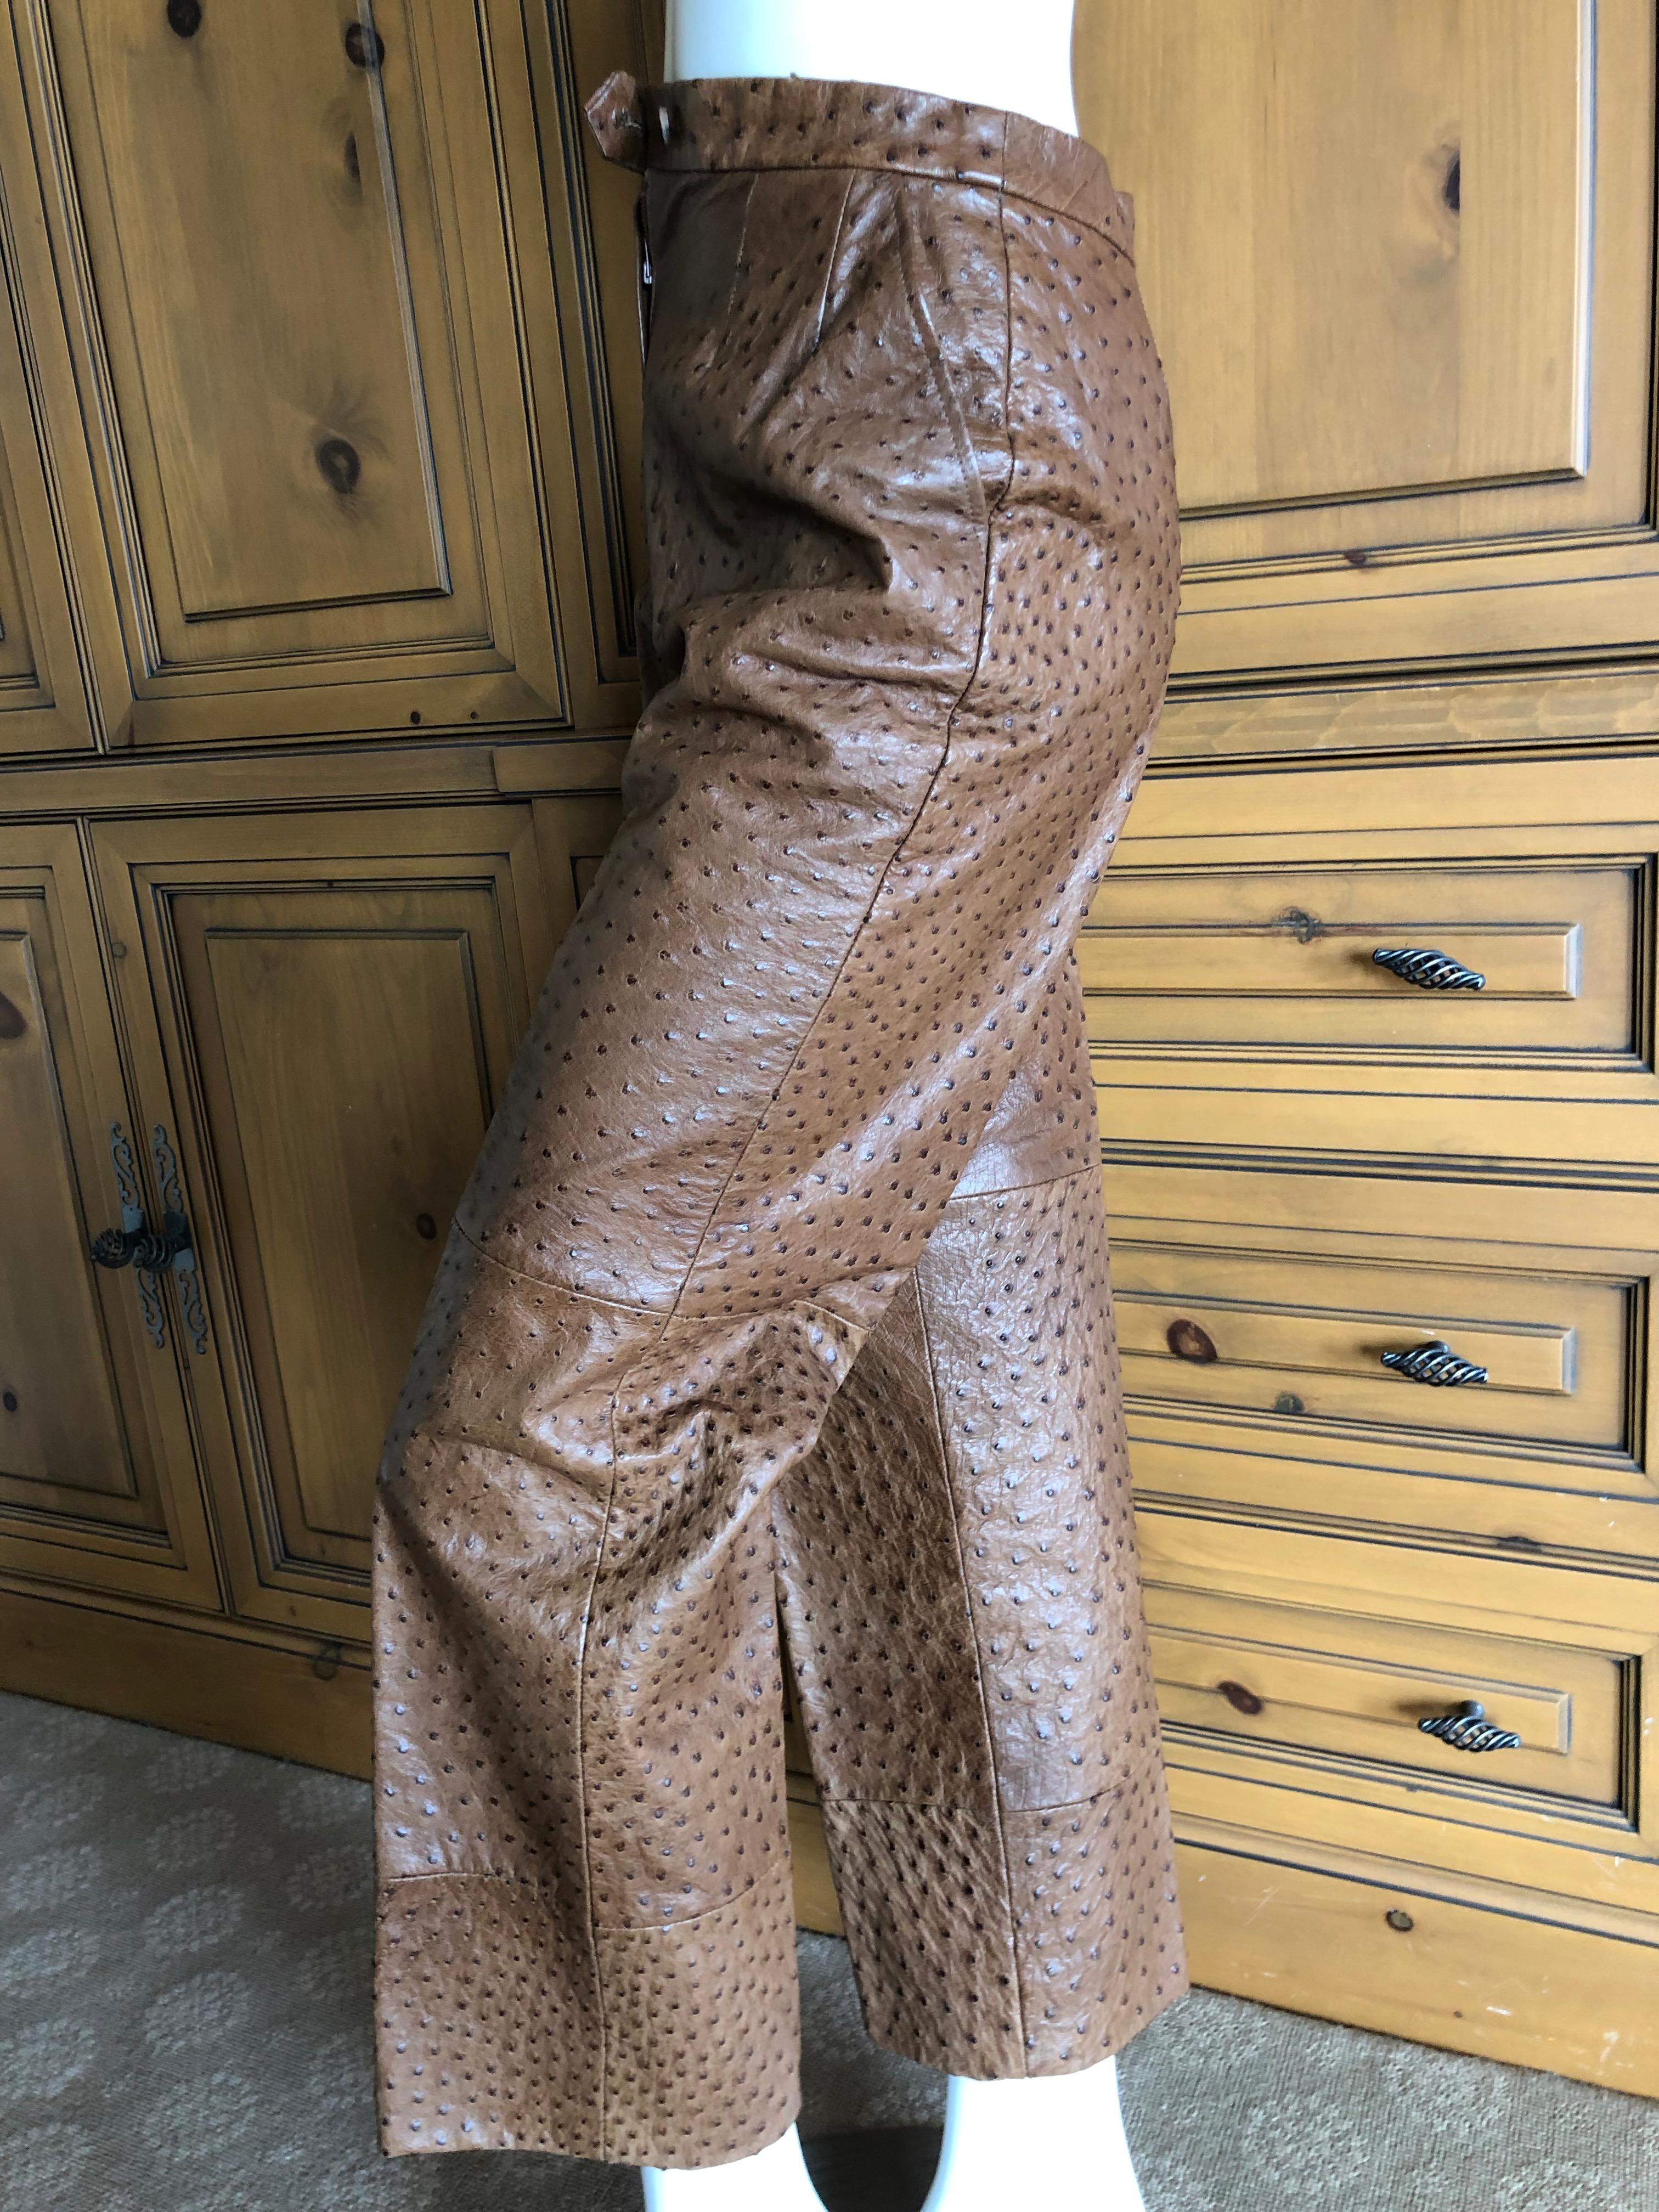 Hermes Paris Extraordinary Vintage Ostrich Motorcycle Suit 
Includes Moto Jacket and Pants.
This is a really special vintage suit. This is fully lined in Hermes silk H fabric.
This is so beautifully made,  such attention to detail is remarkable.
In